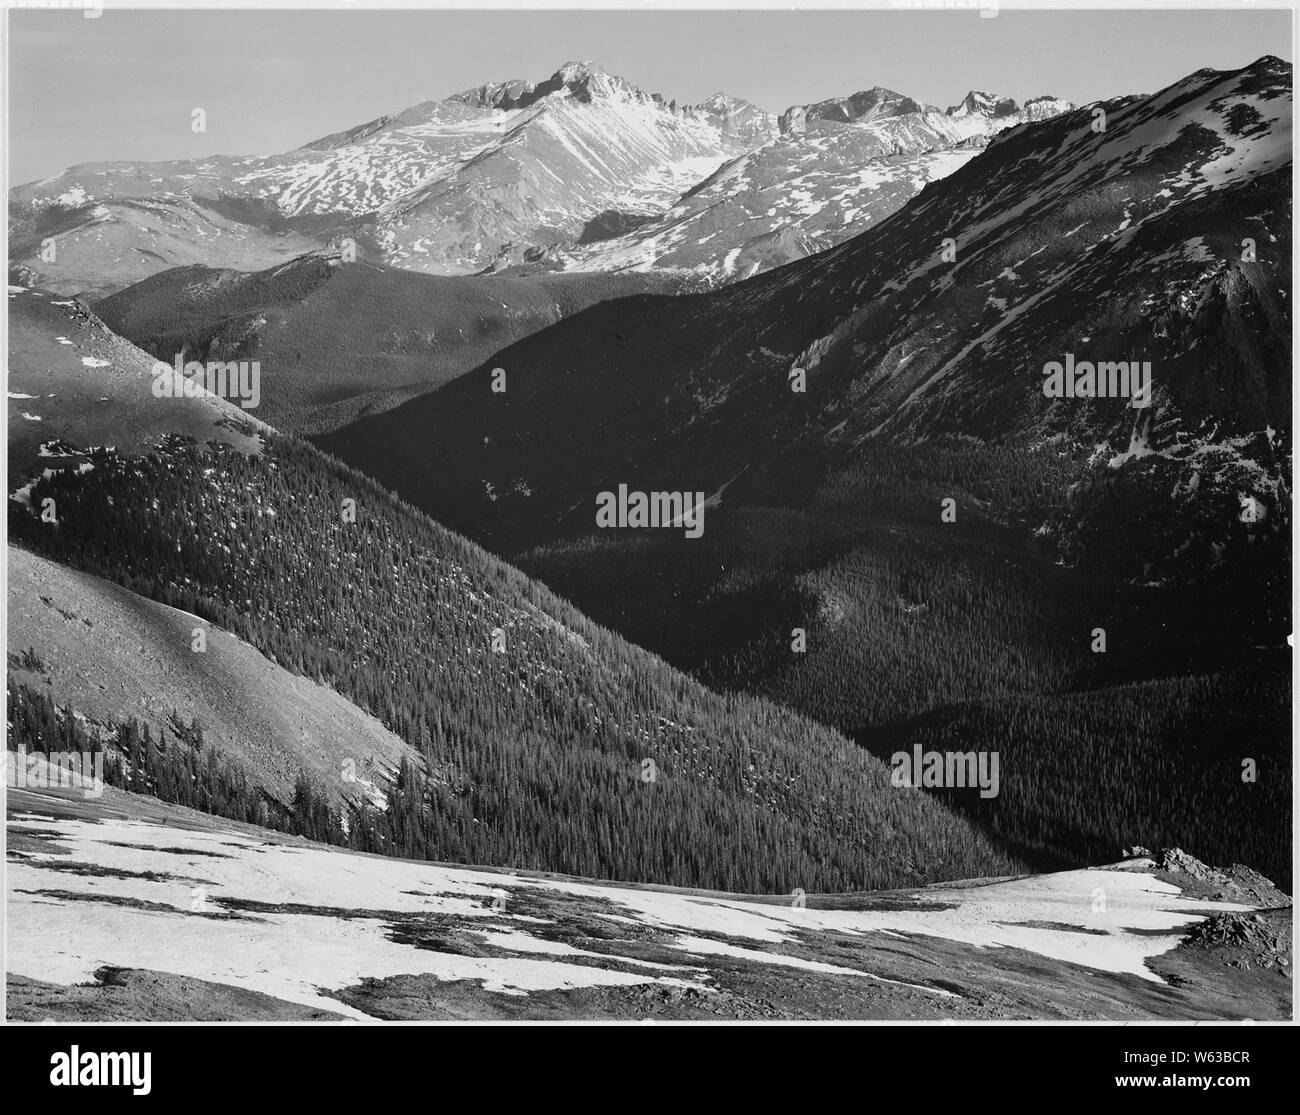 Close in view, dark shadowed hills in foreground, mountains in background, Long's Peak, Rocky Mountain National Park, Colorado., 1933 - 1942 Stock Photo